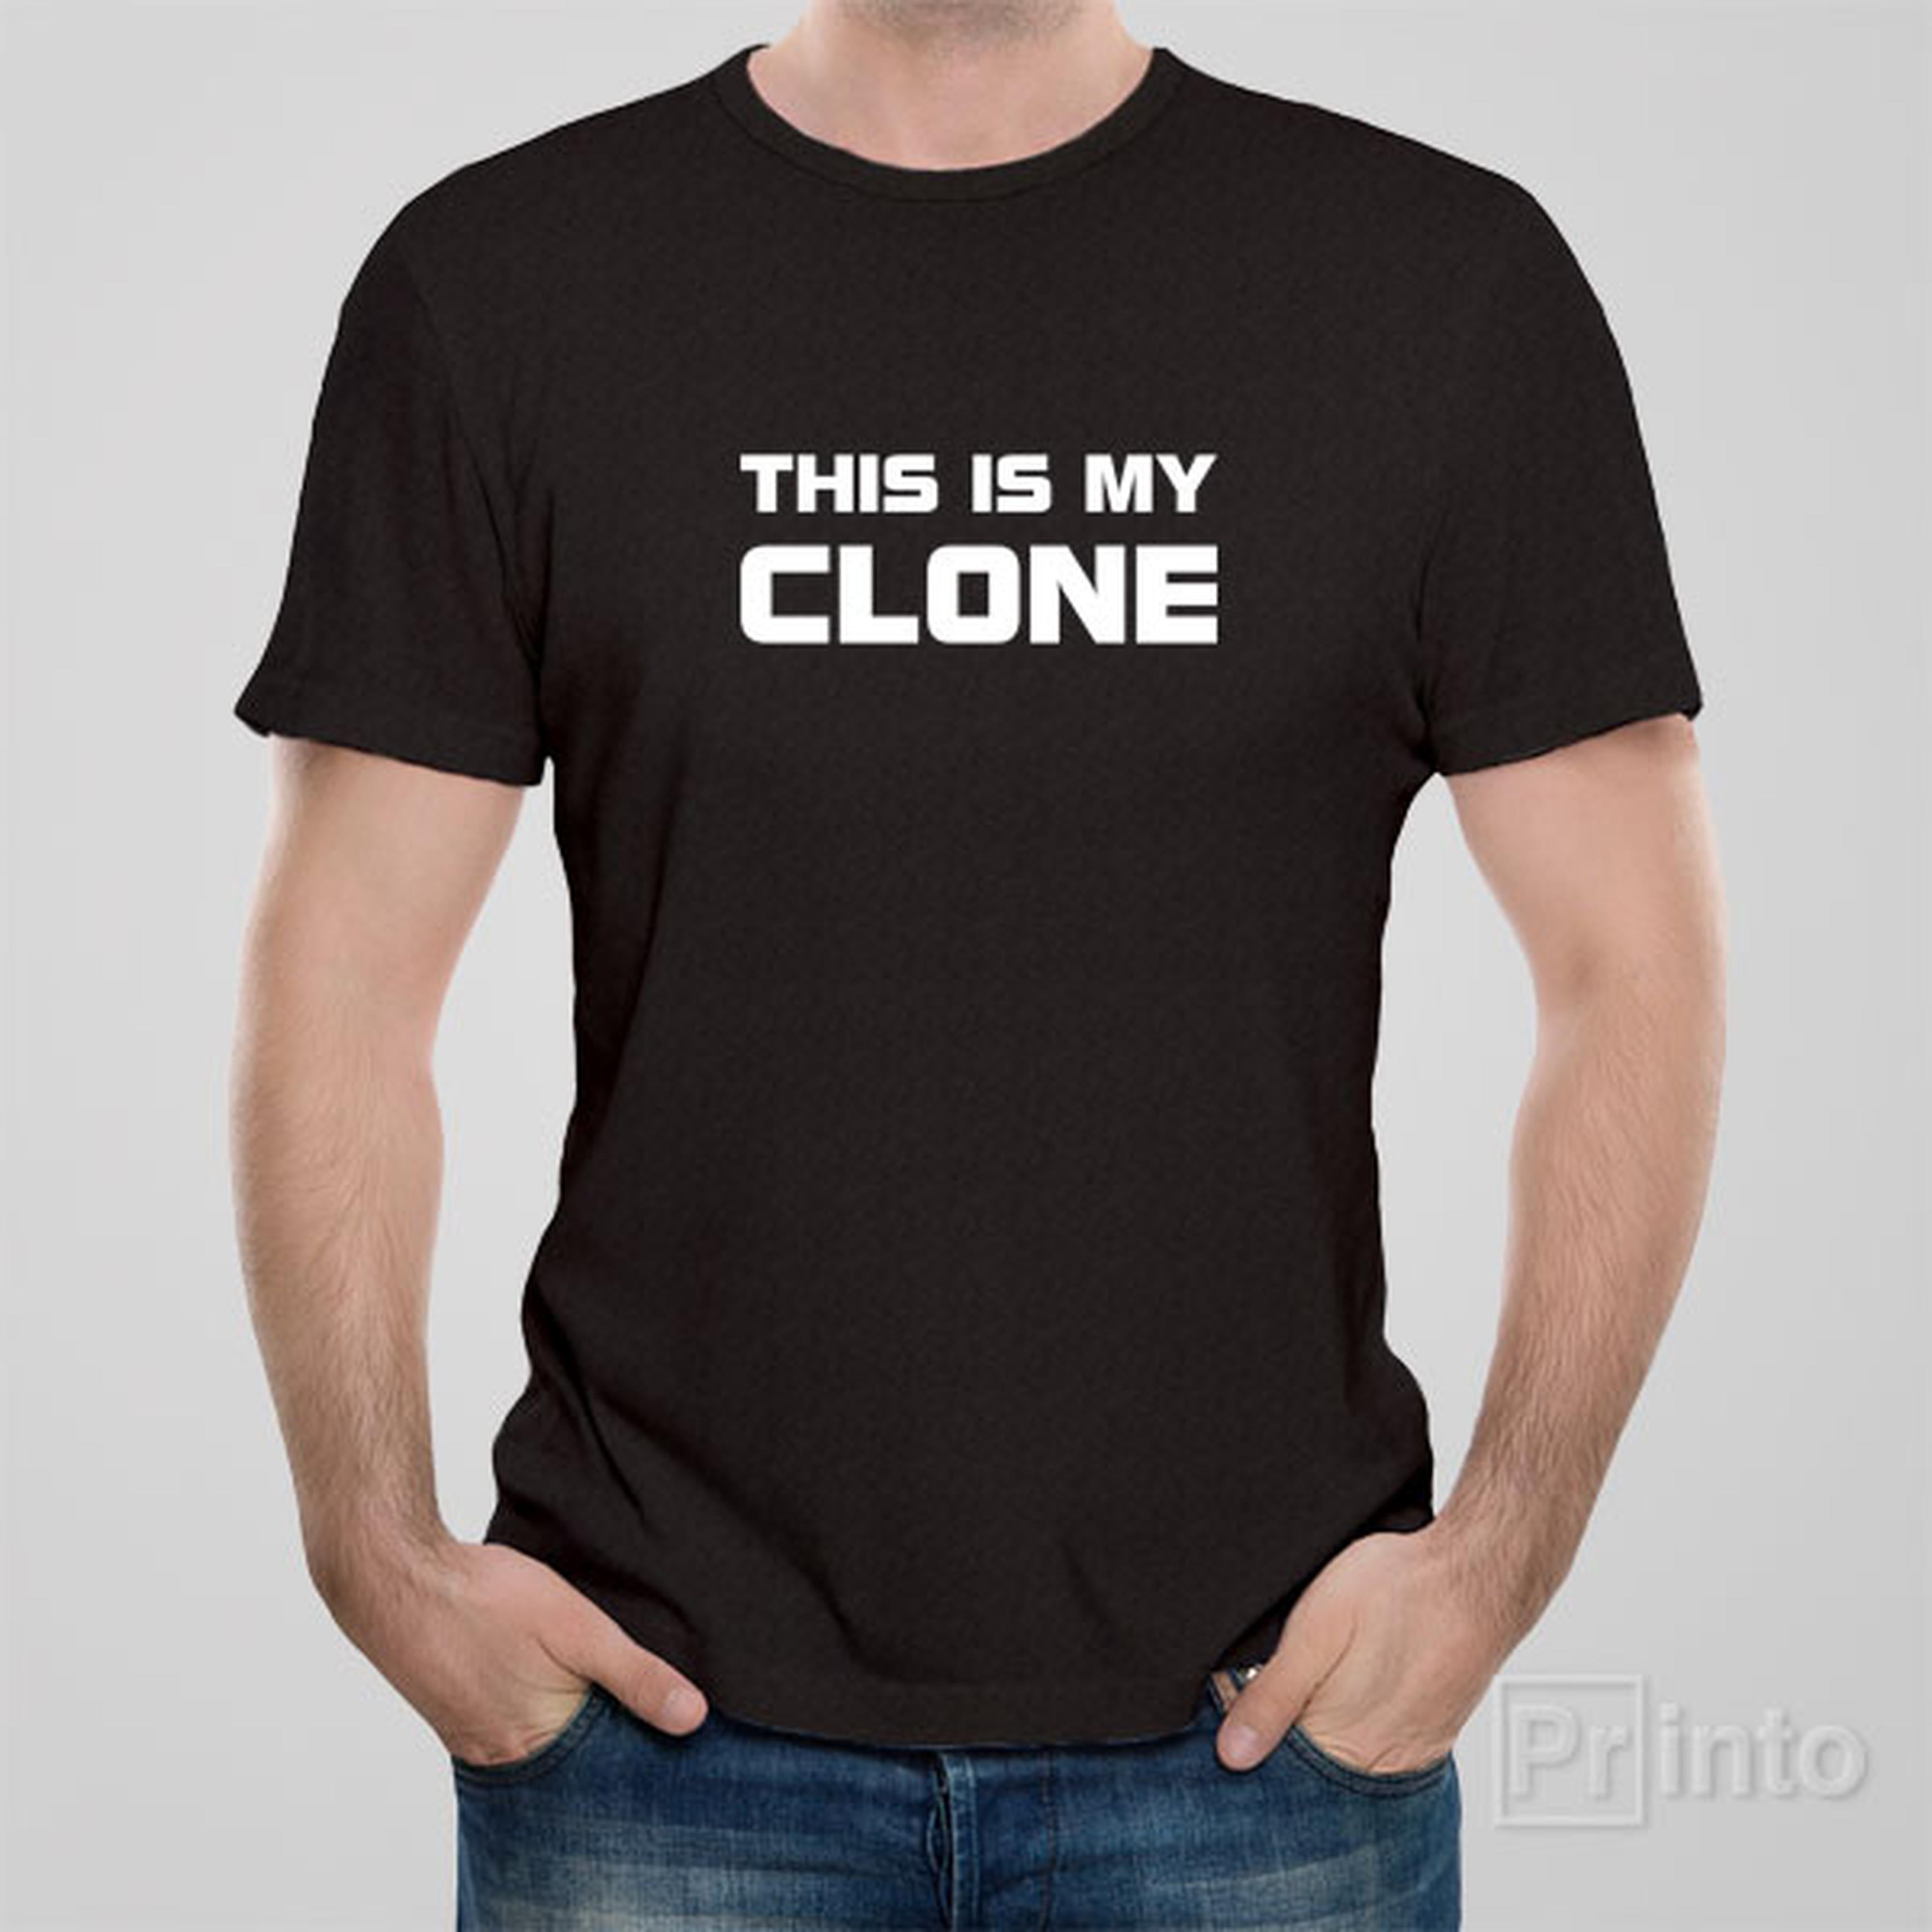 this-is-my-clone-t-shirt